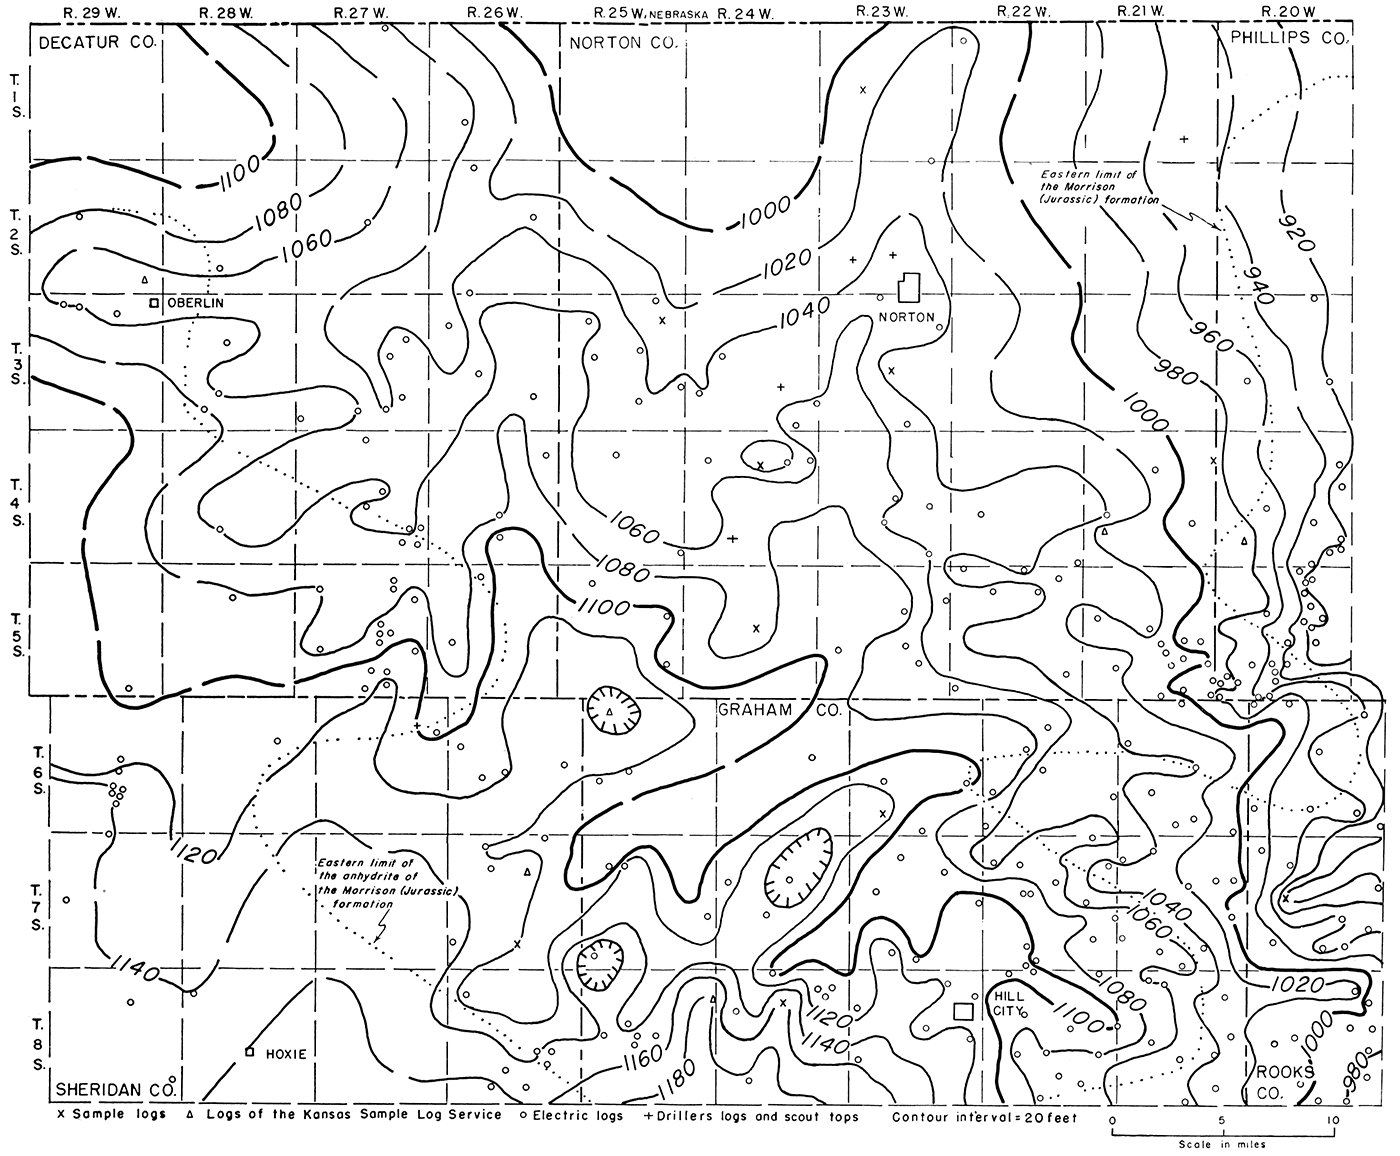 Isopachous map showing by 20-foot isopachs the thickness of the interval from the top of the Stone Corral formation to the top of the Dakota formation.